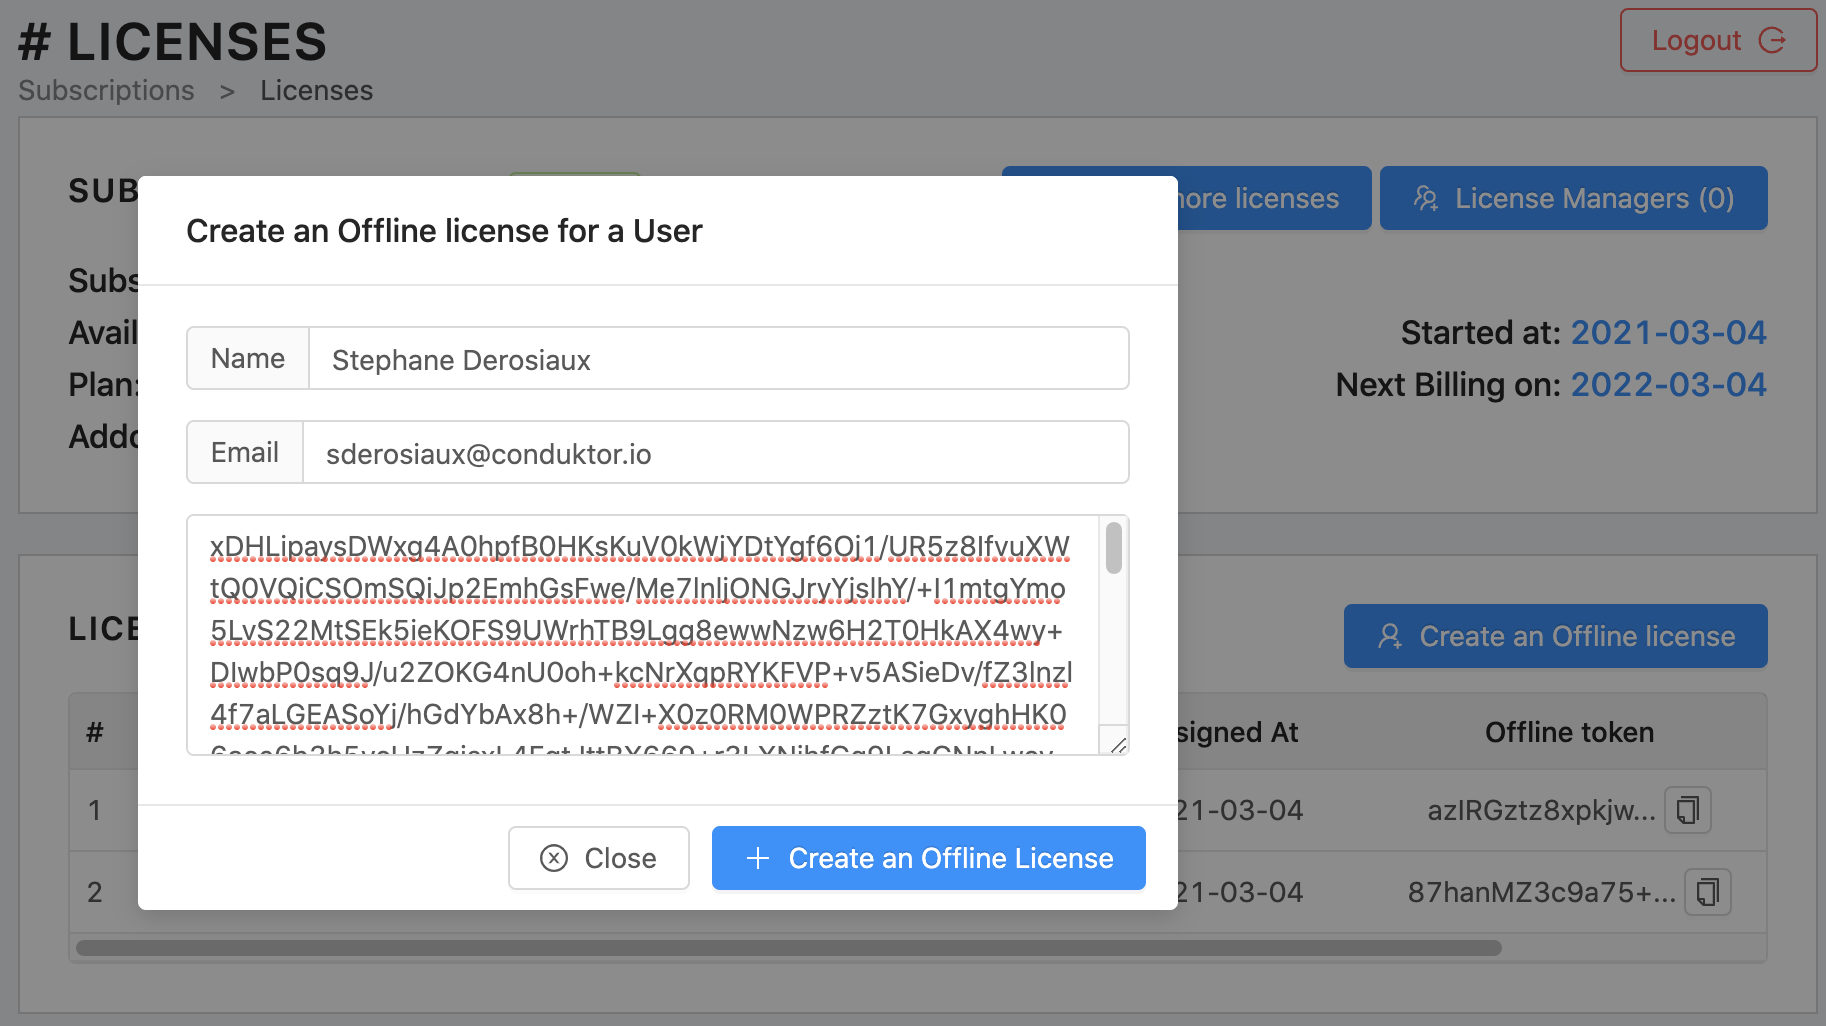 Step 1: create an offline license from the user code